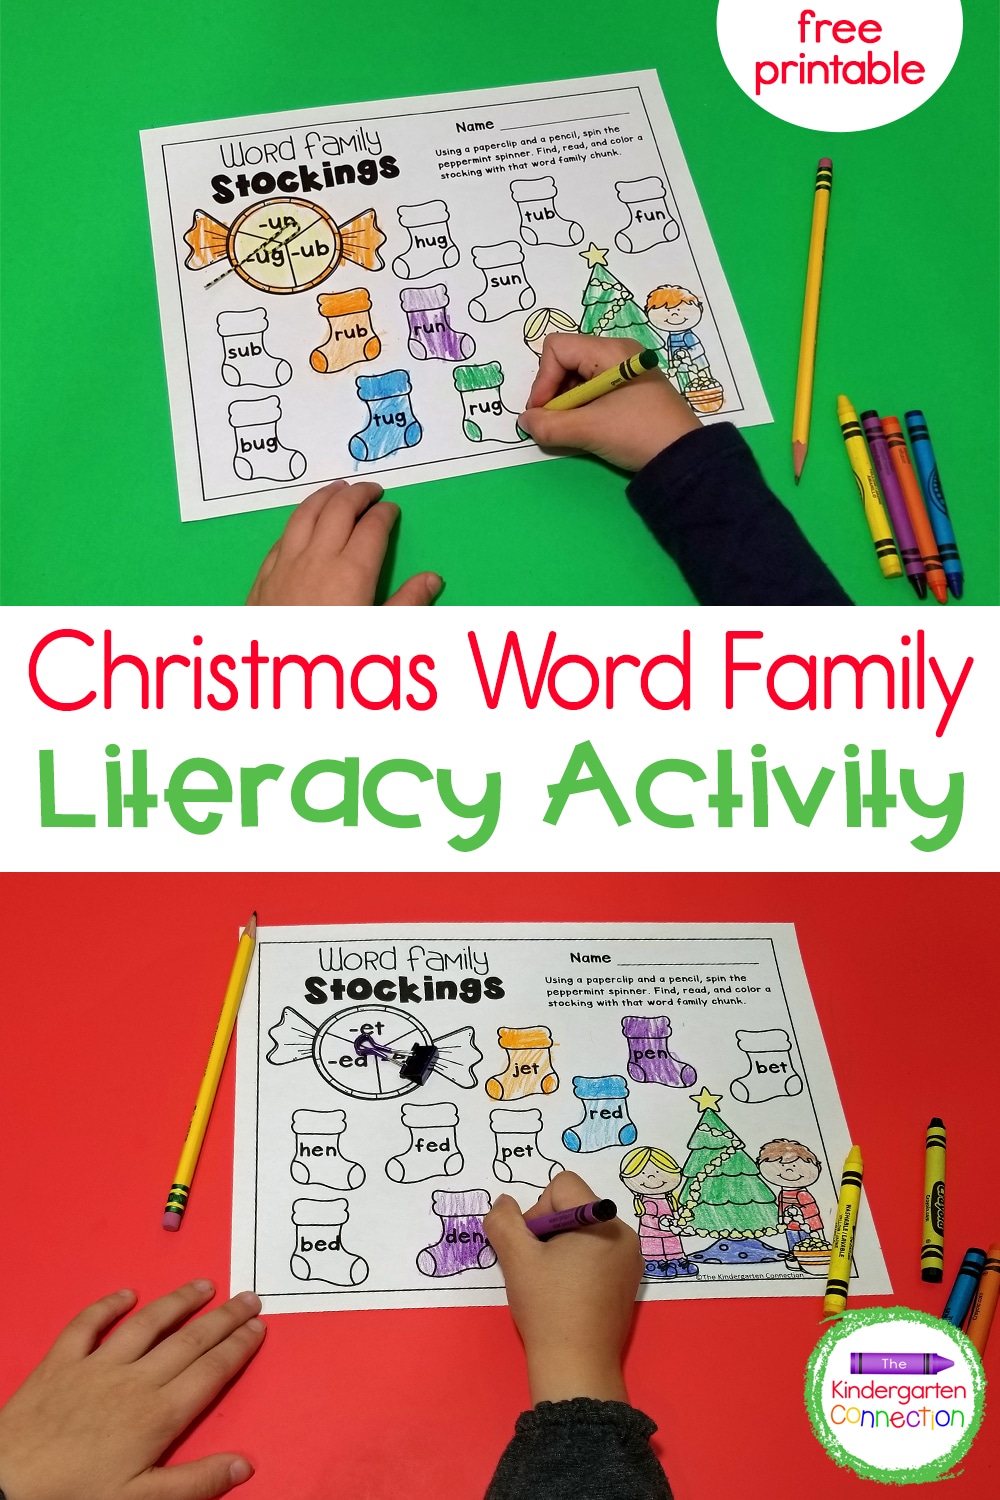 Work on word families this season with these fun and free Christmas Word Family Games! They are a fun holiday addition to literacy centers!